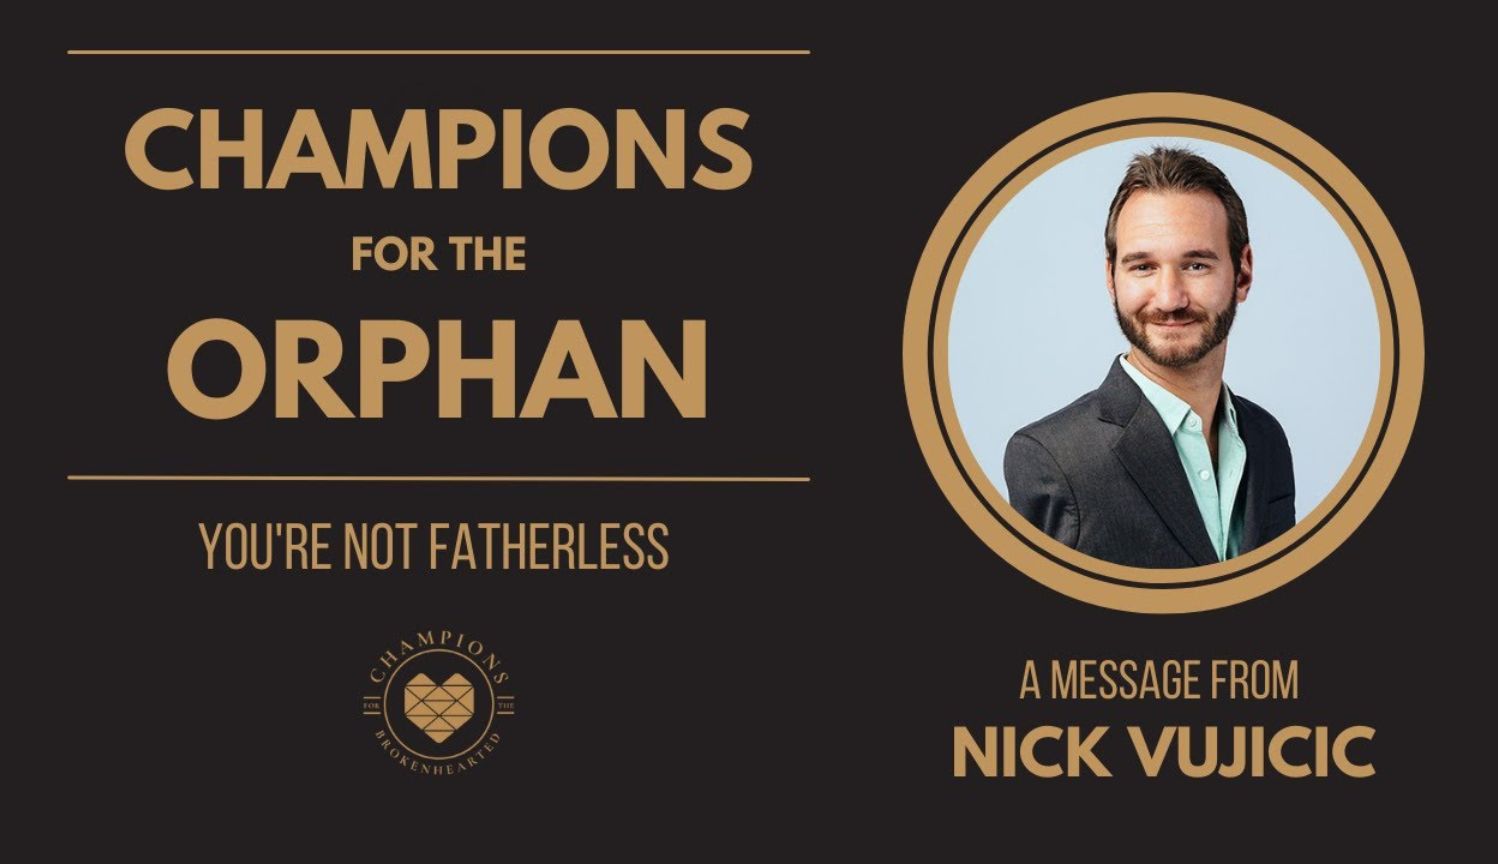 Part 2: champions for the orphans